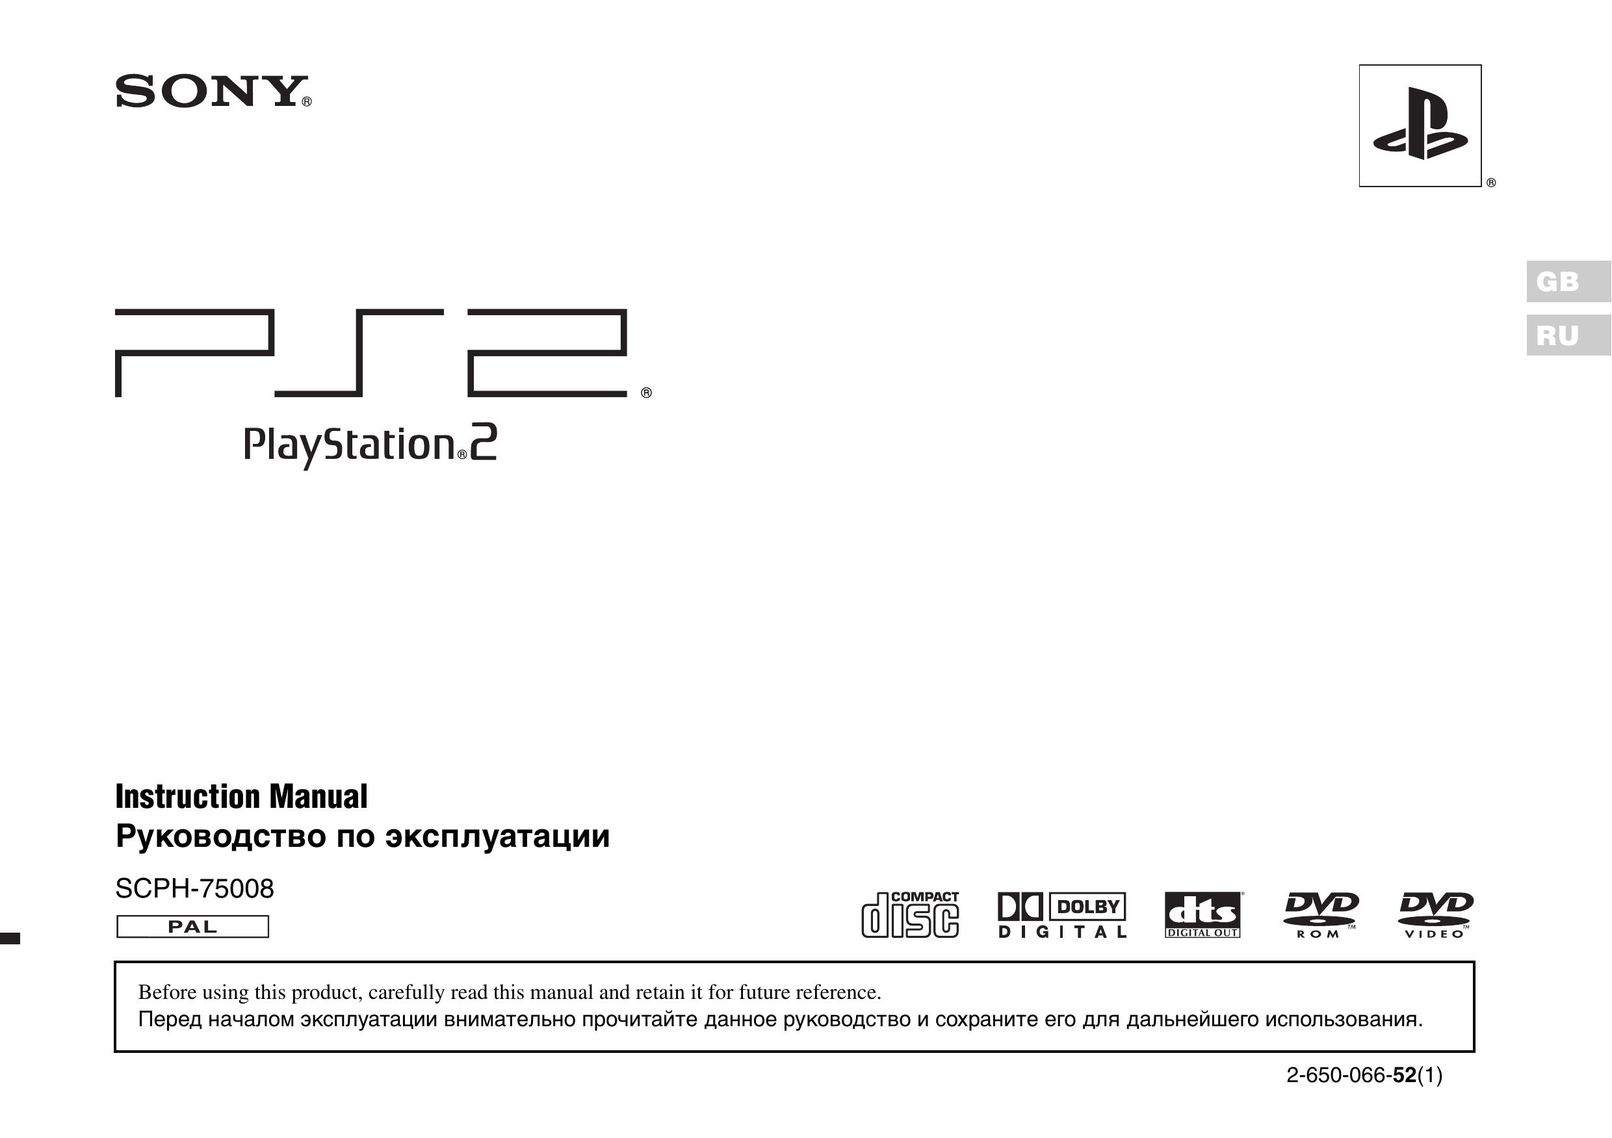 Sony SCPH-75008 Handheld Game System User Manual